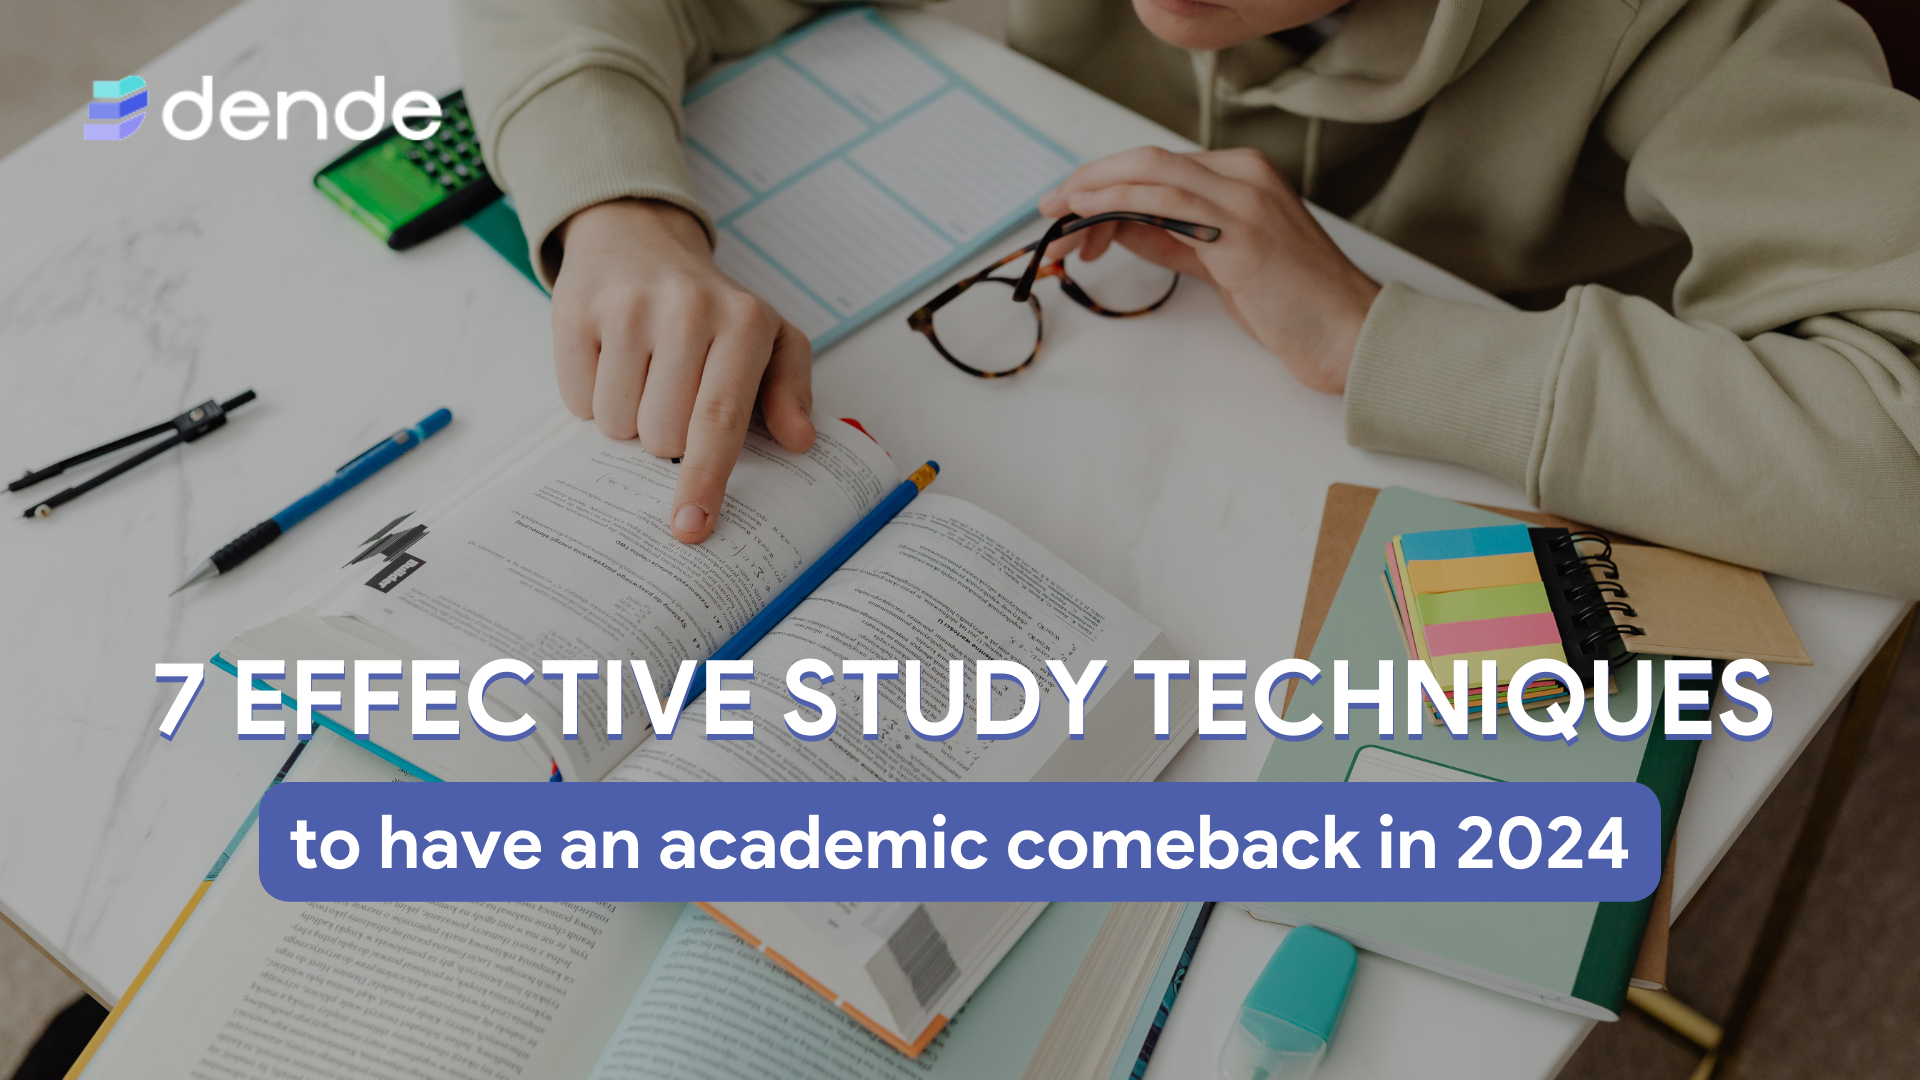 7 study techniques to have an academic comeback in 2024